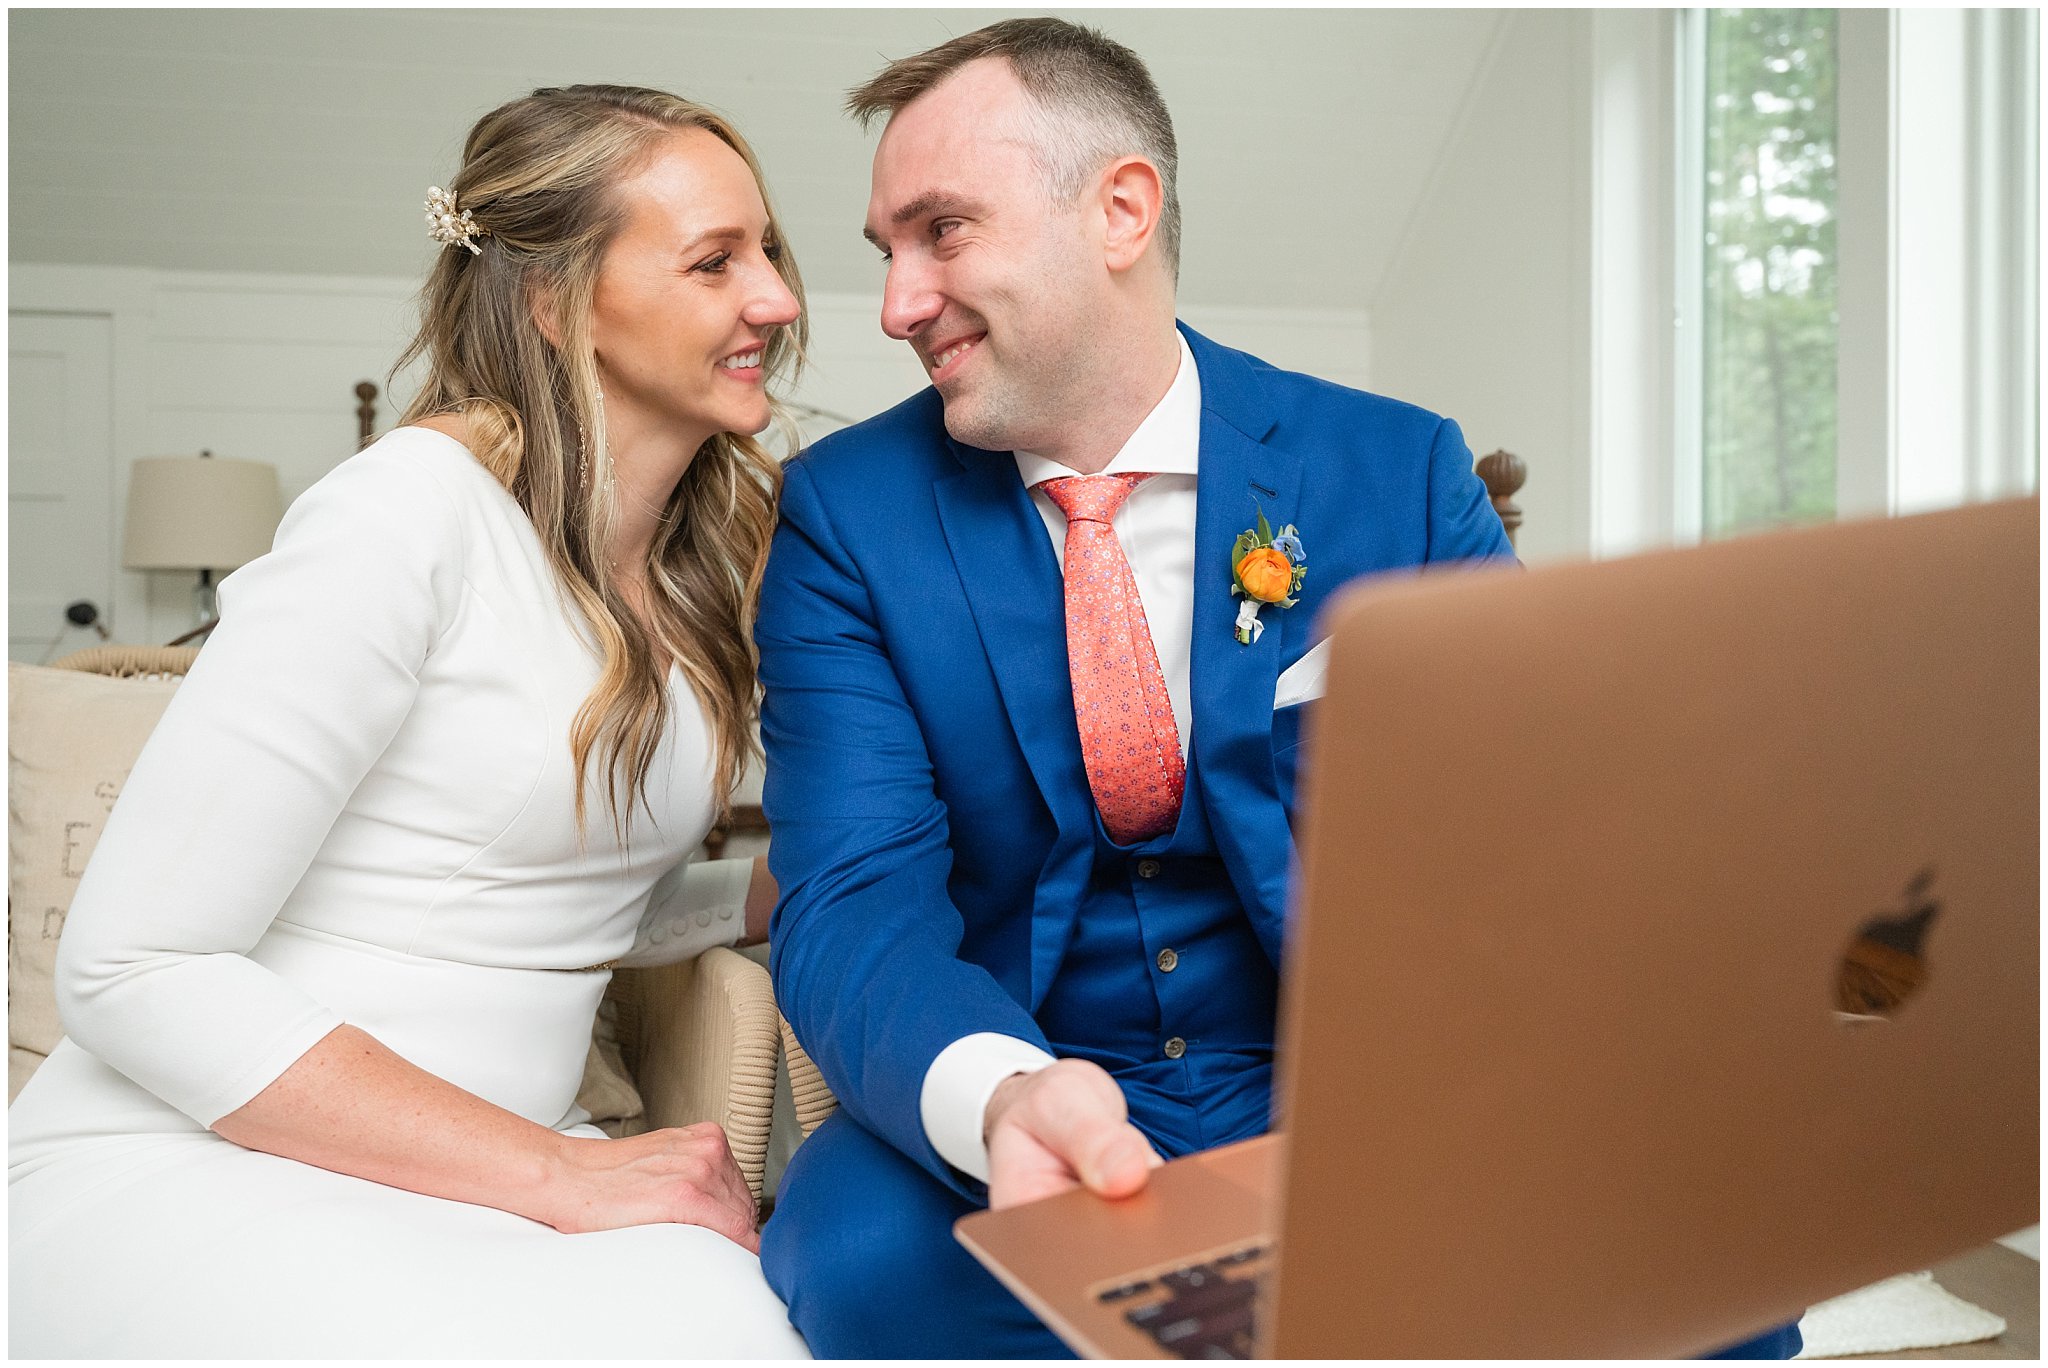 Bride and groom video chat with guests before wedding | Mountainside Weddings Kalispell Montana Destination Wedding | Jessie and Dallin Photography